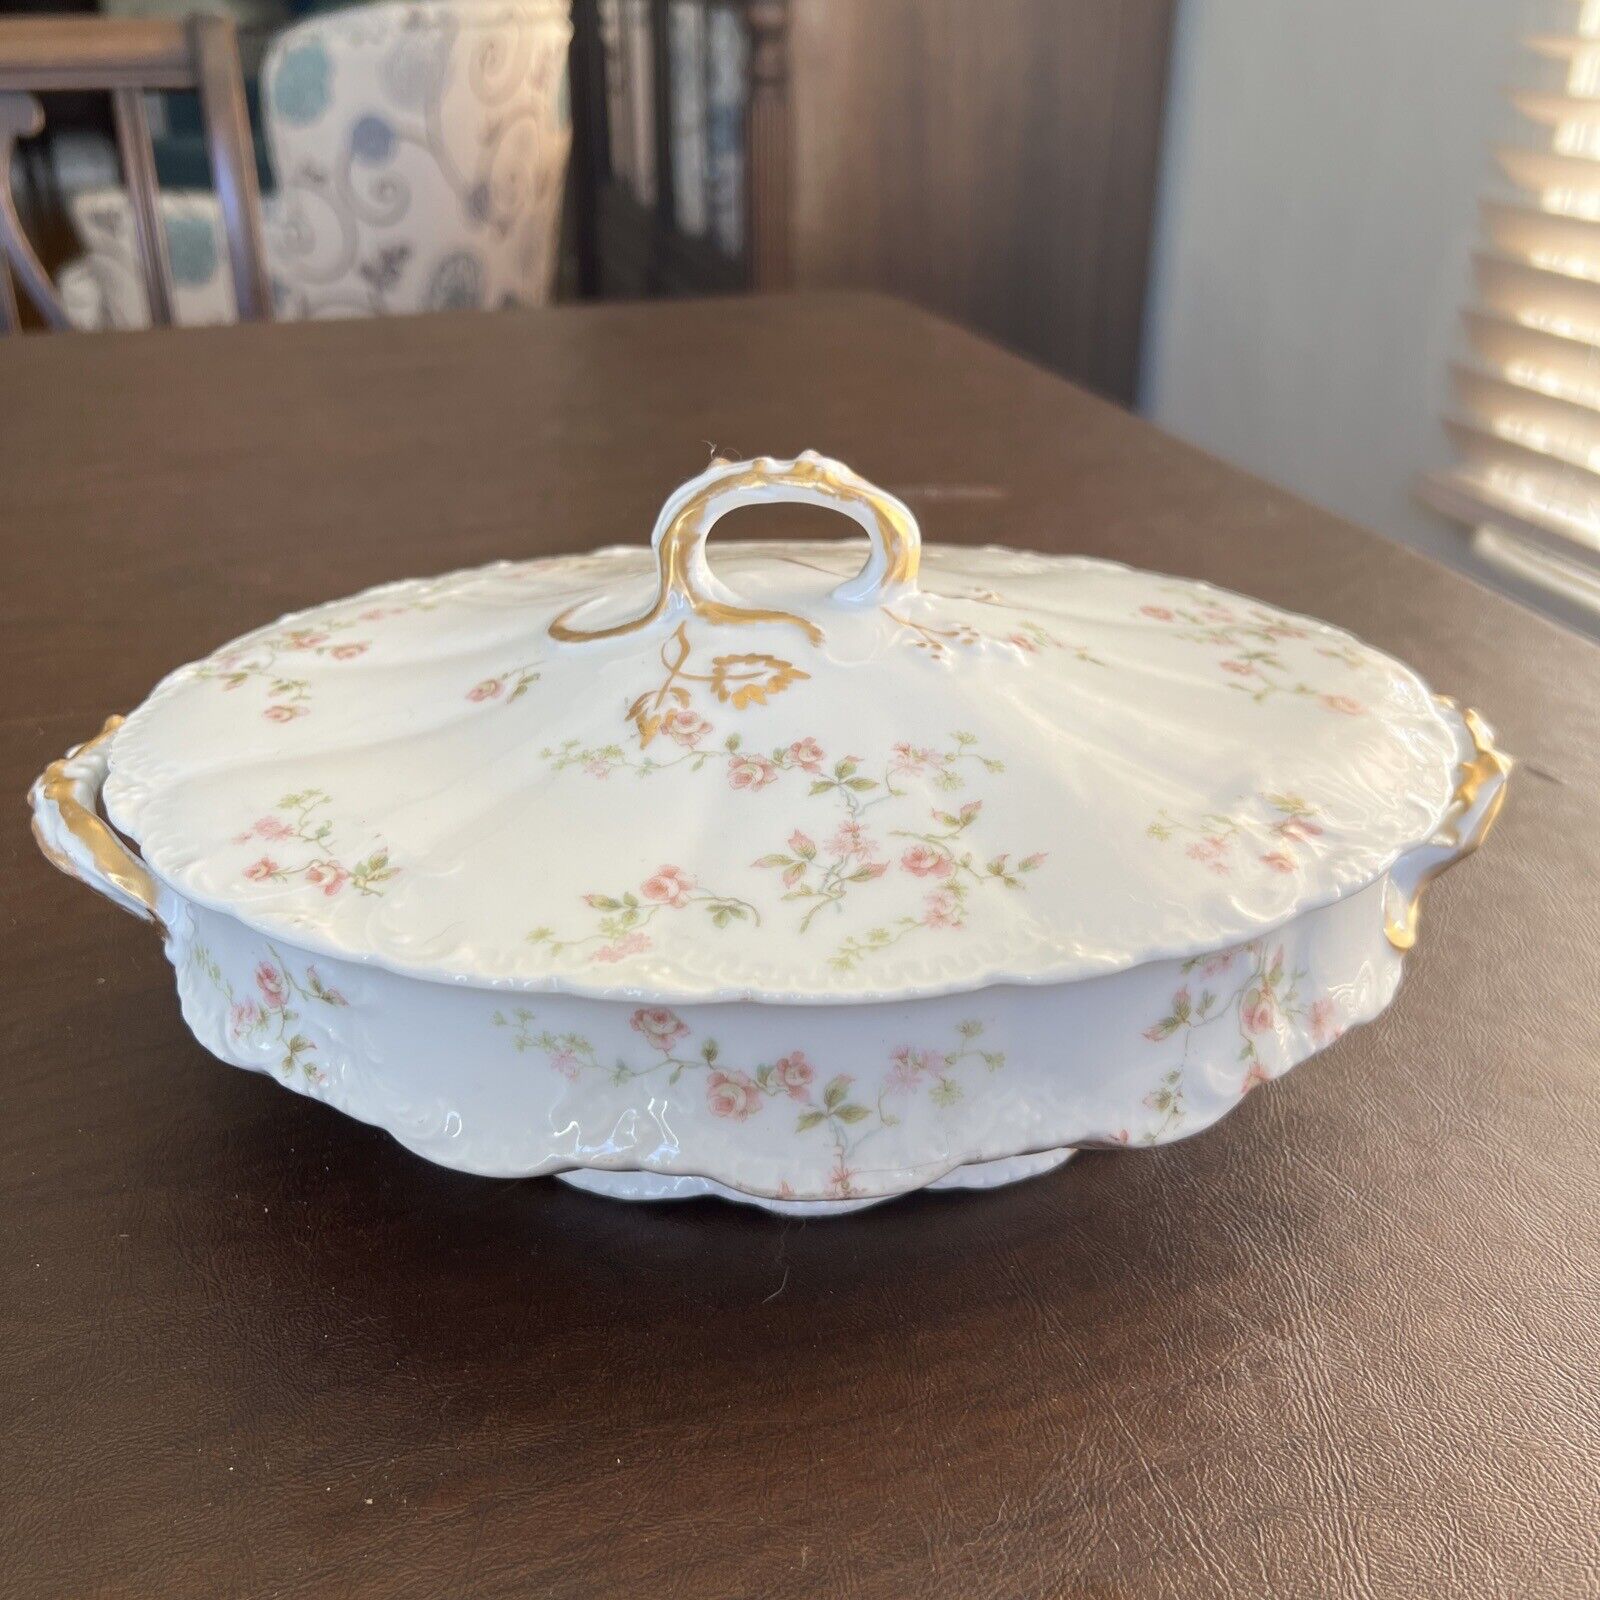 Limoges TH Pink Roses, Harrison Rose? Oval Casserole Covered Dish 11.25” Pretty